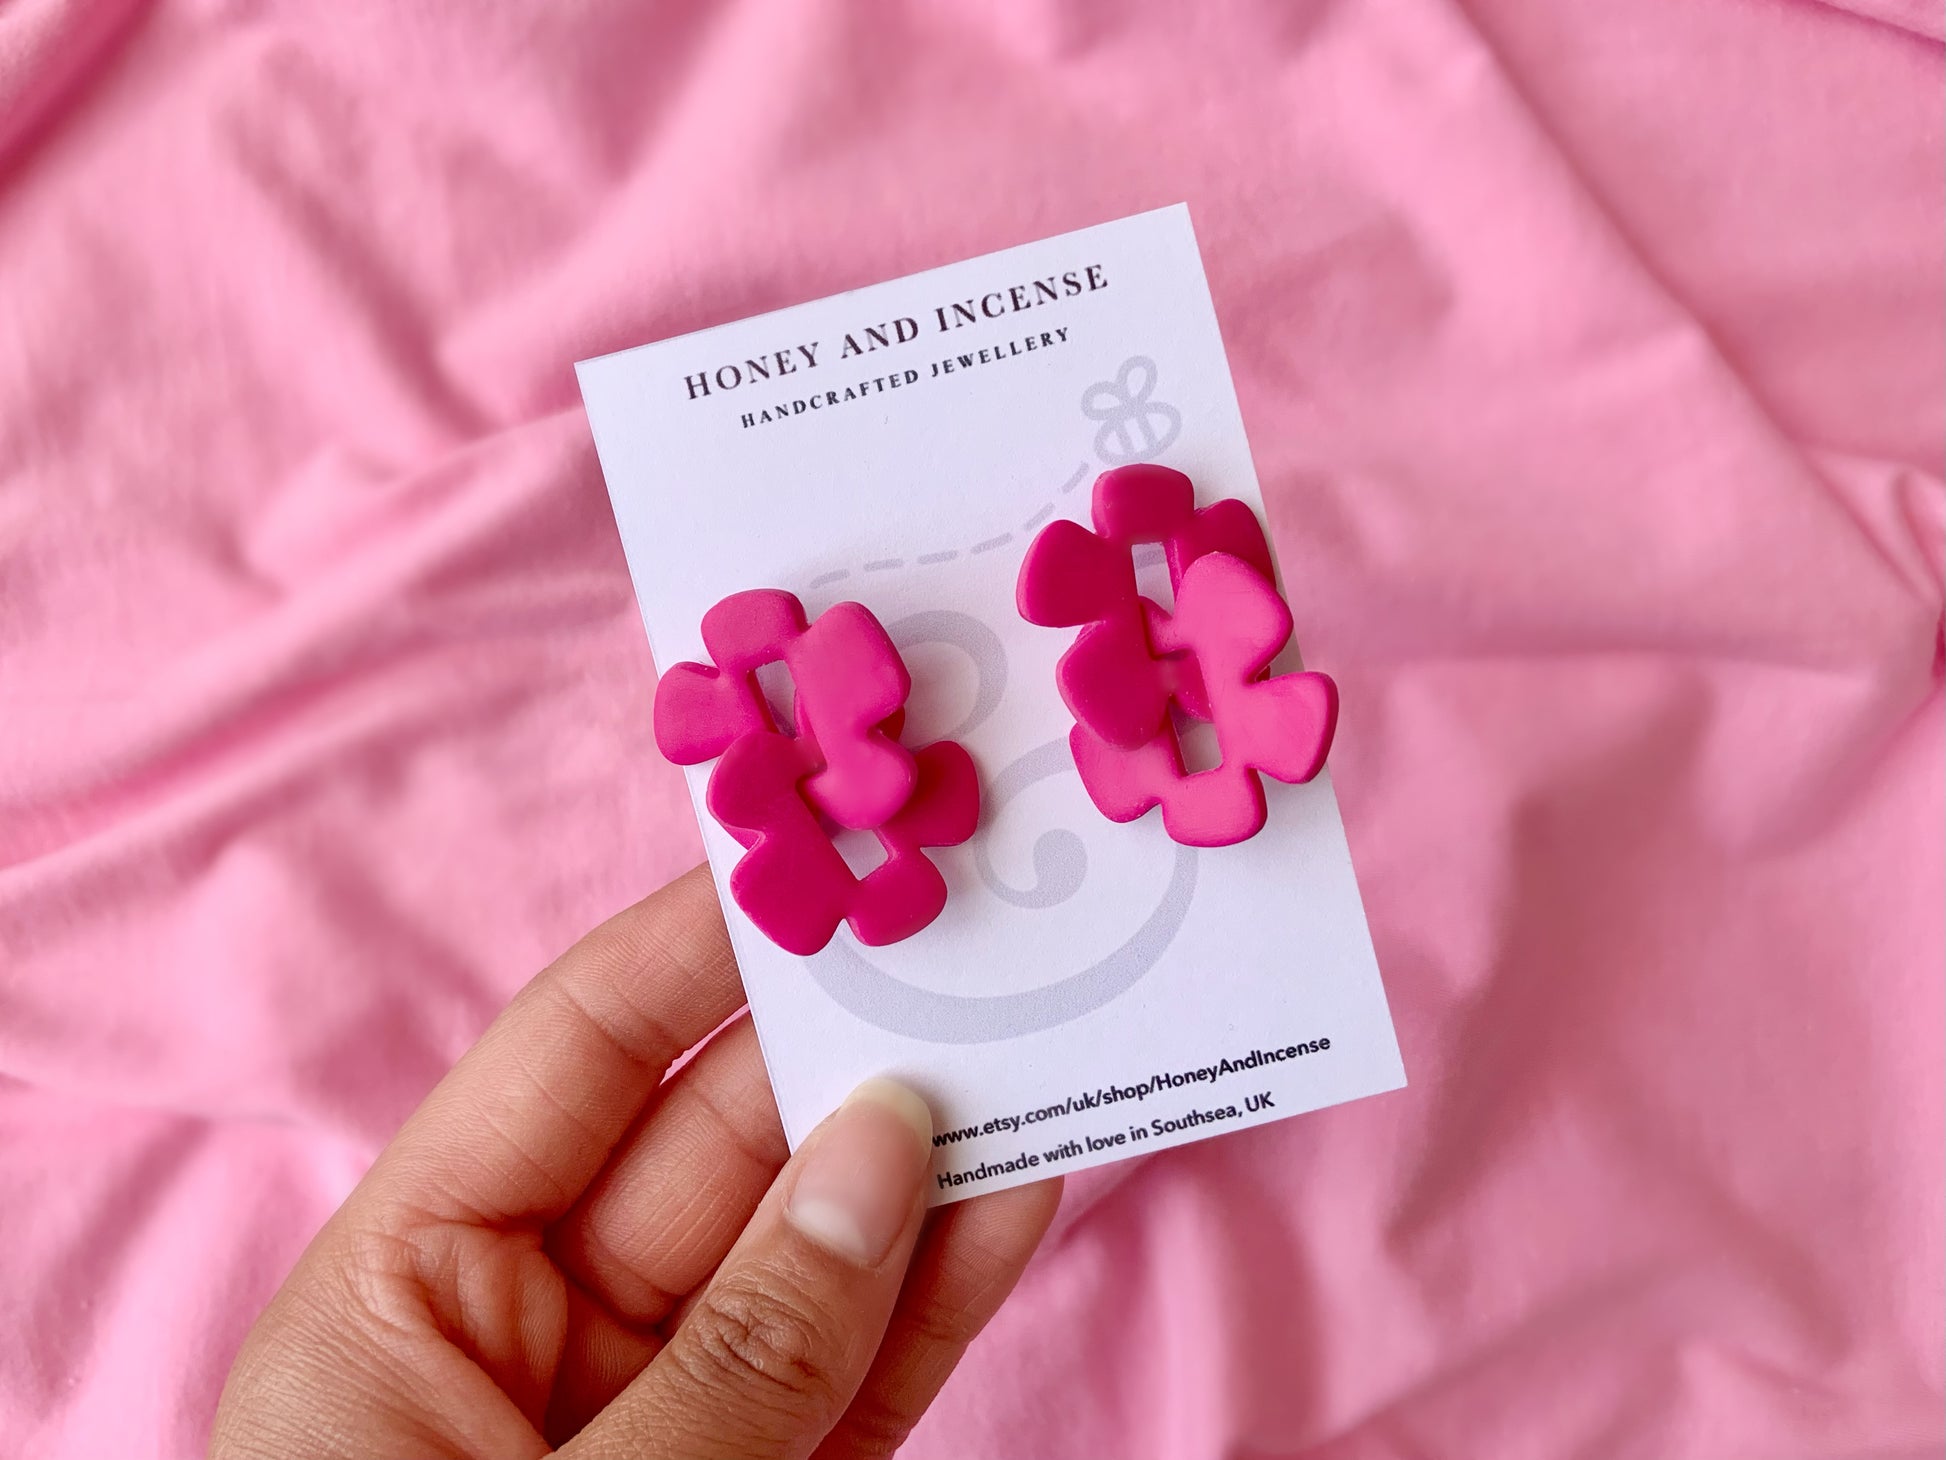 Hot Pink Flower Chain Link Polymer clay earrings, statement studs pinks